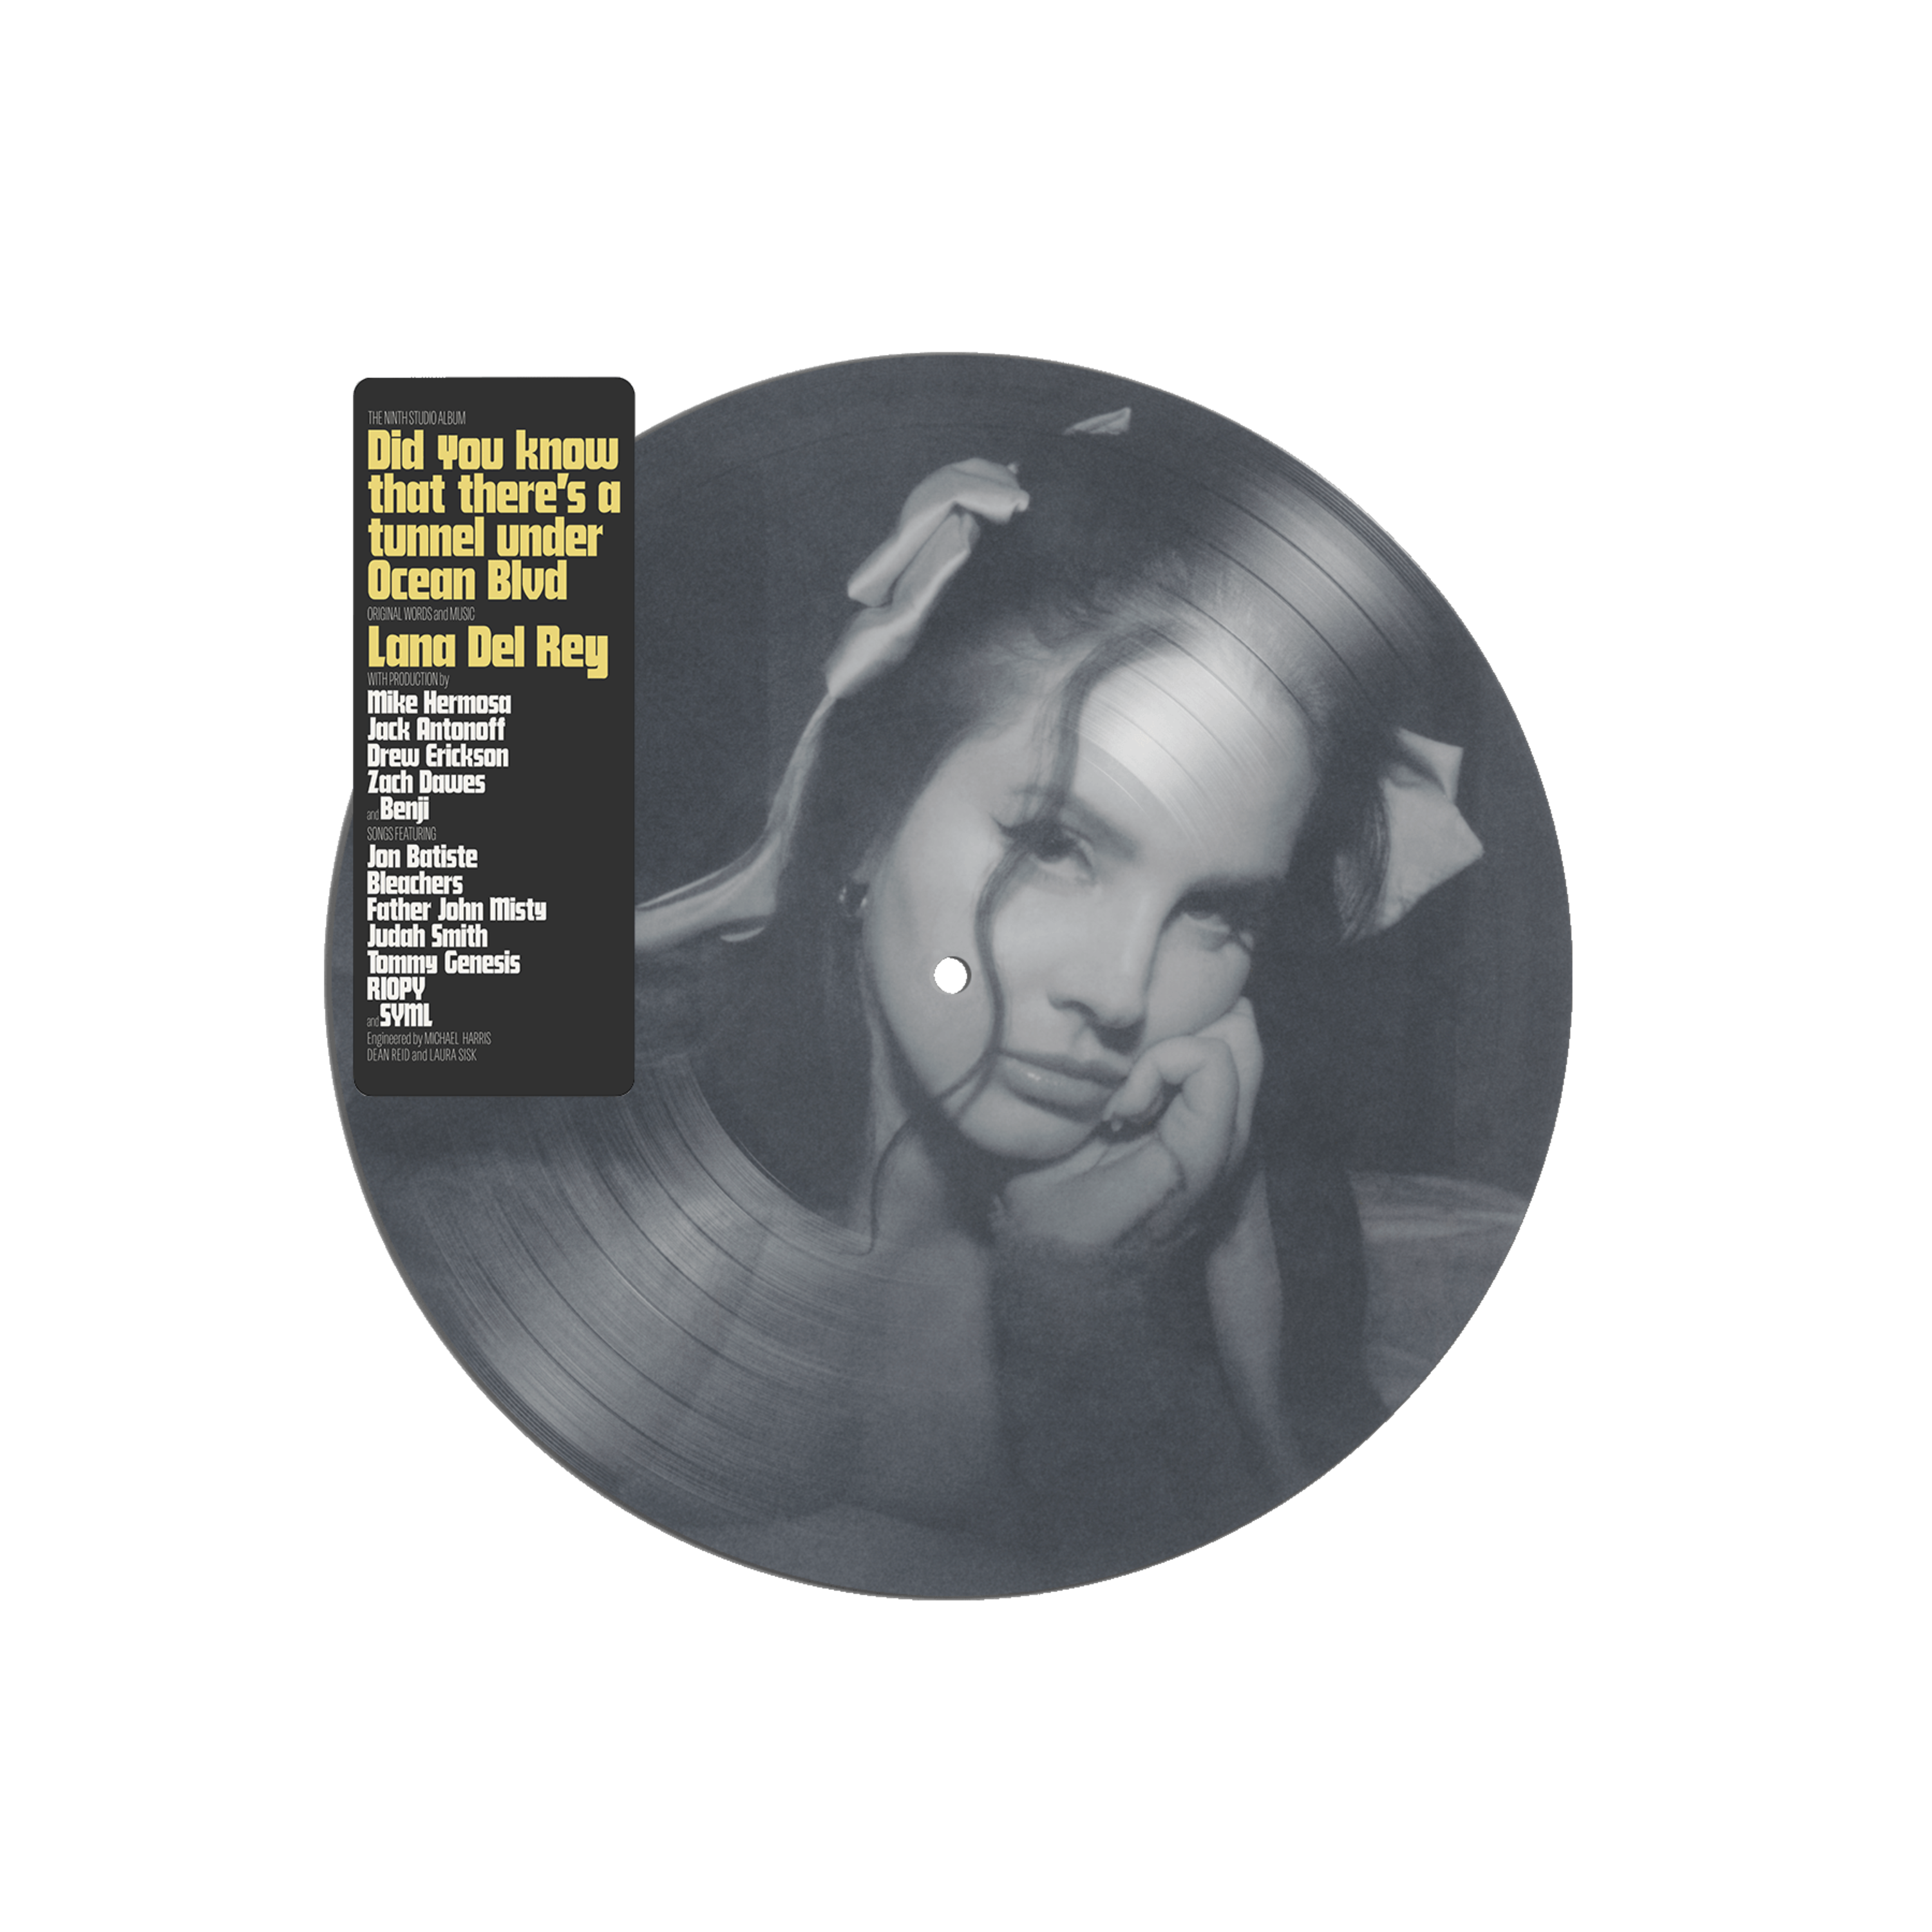 Bravado - Did you know that there's a tunnel under ocean blvd - Lana Del Rey  - Exclusive Picture Disc Vinyl